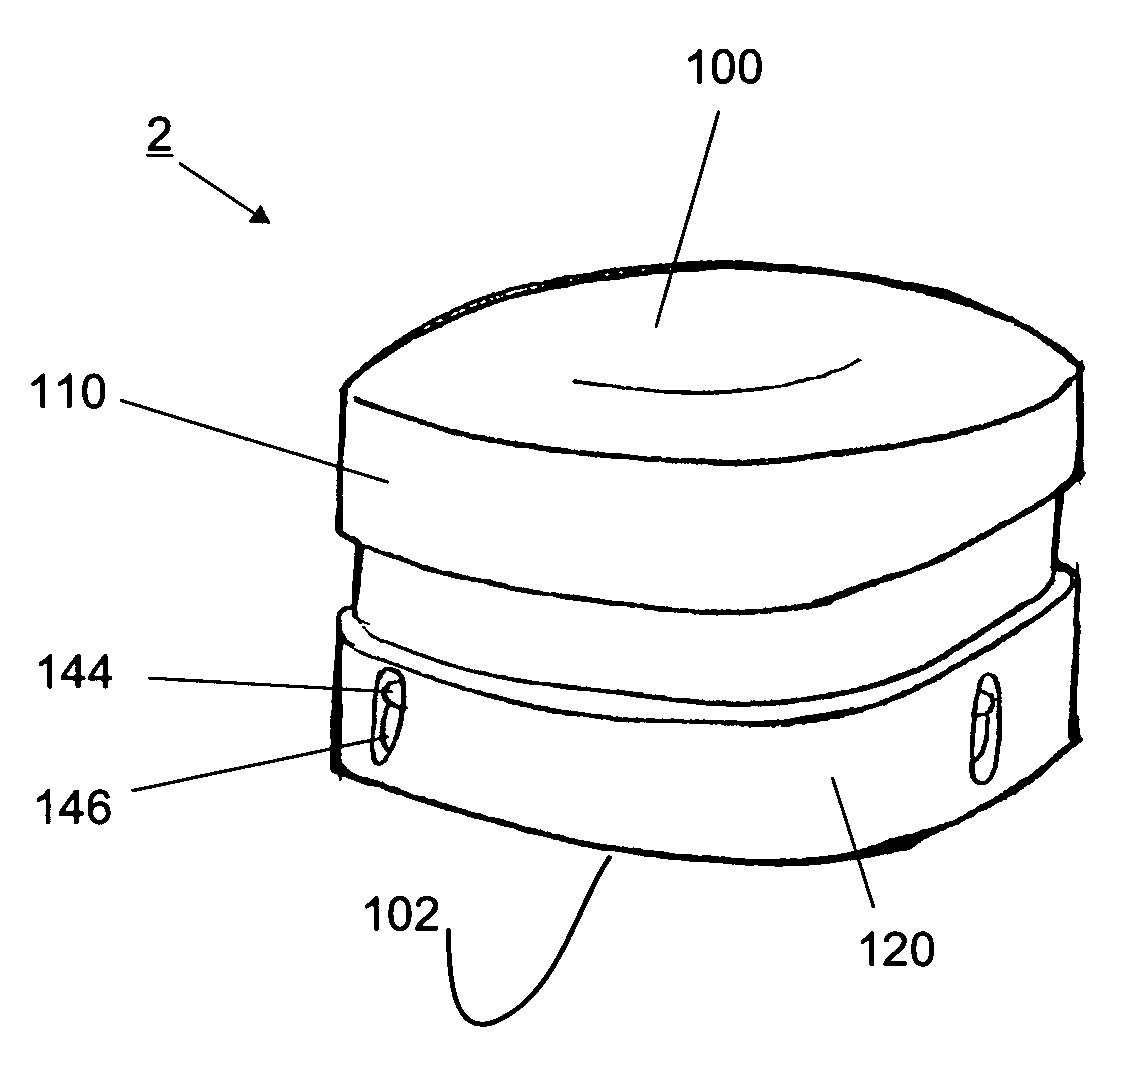 Artificial disc prosthesis for replacing a damaged nucleus